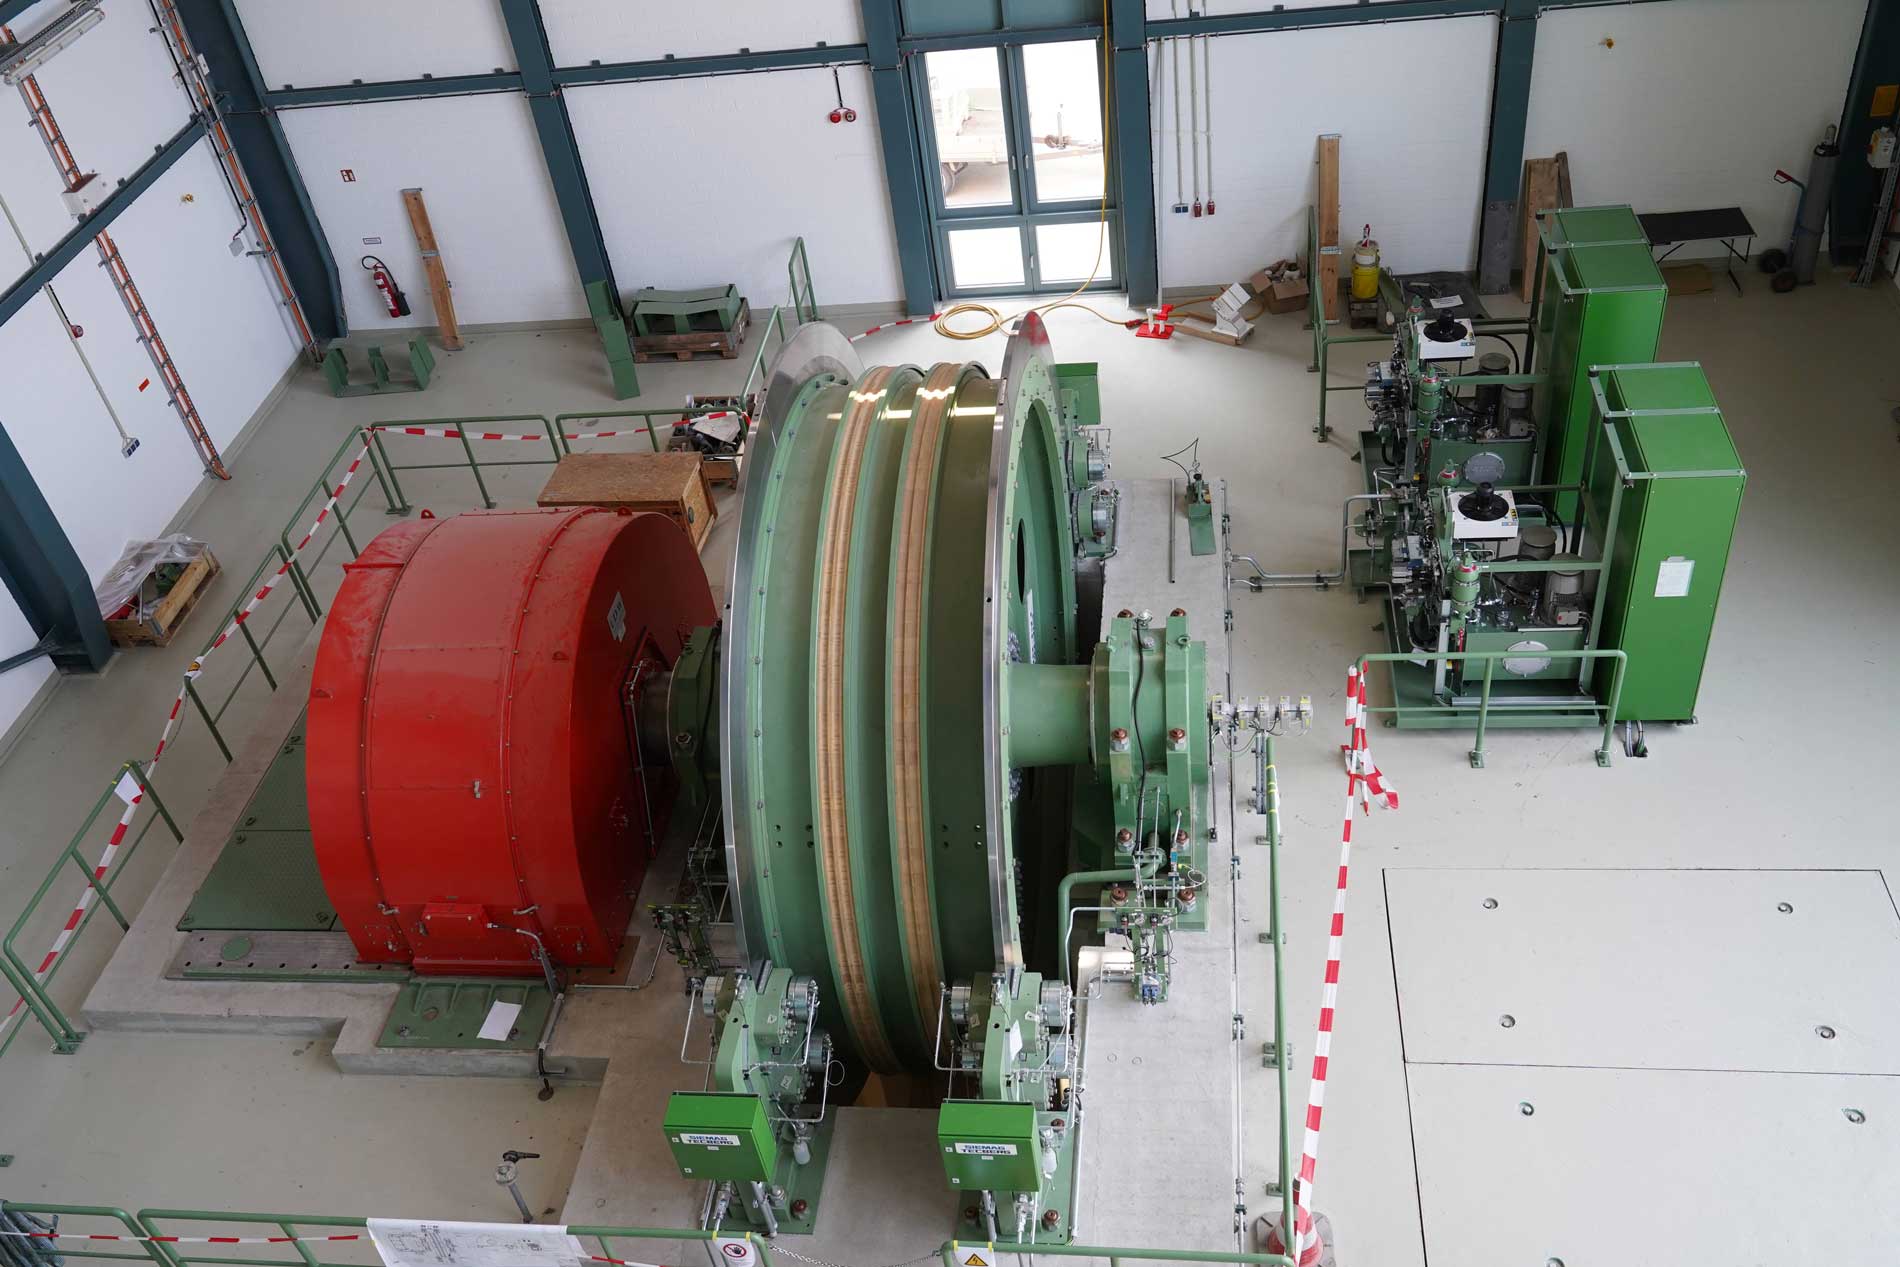 In a hall there is a winding engine without attached rope